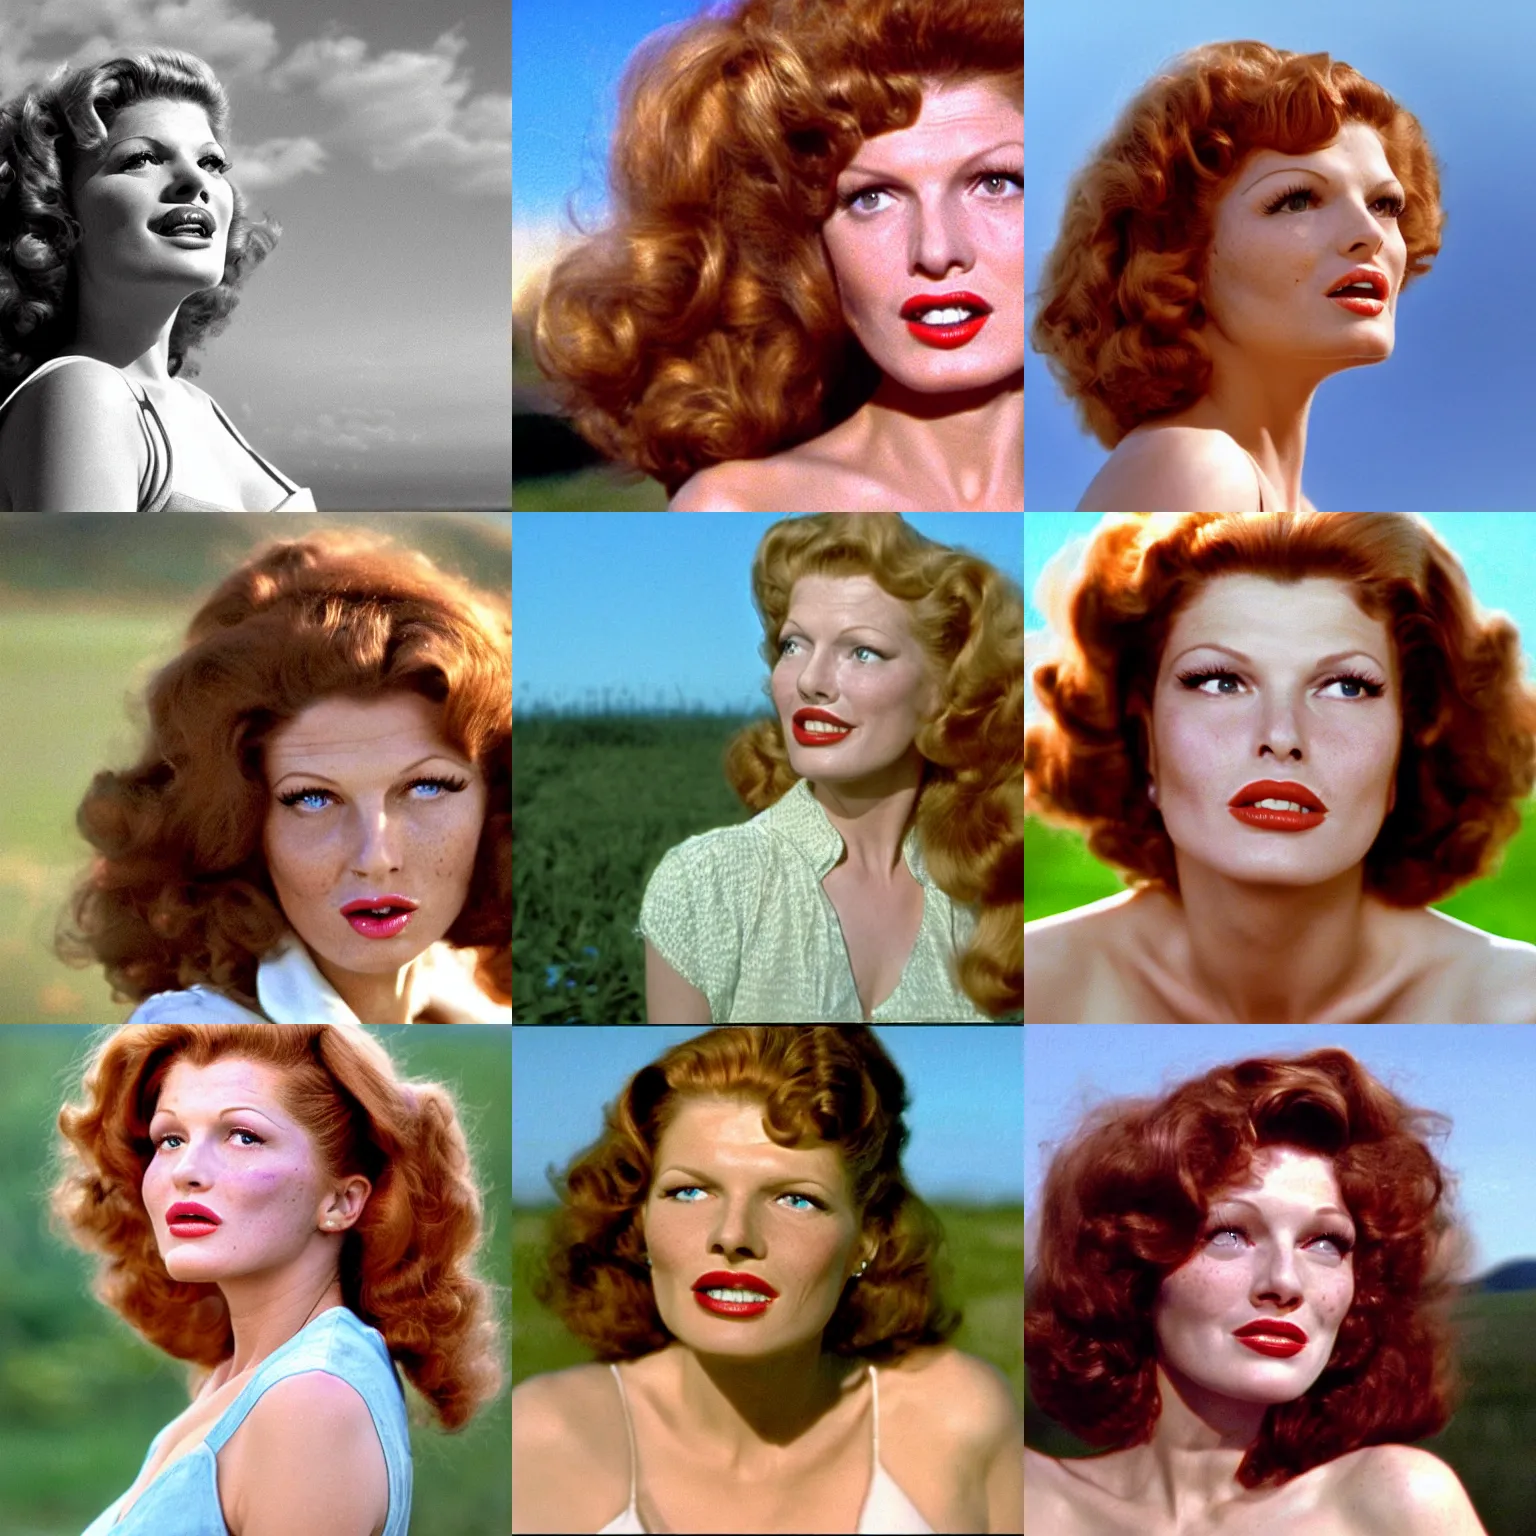 Image similar to natural 8 k shot from a 2 0 0 5 romantic comedy by sam mendes of rita hayworth with natural face, freckles, natural skin, beauty spots and very small lips. she stands and looks on the horizon with winds moving her hair. fuzzy blue sky in the background. small details, natural lighting, 2 4 mm lenses, sharp focus